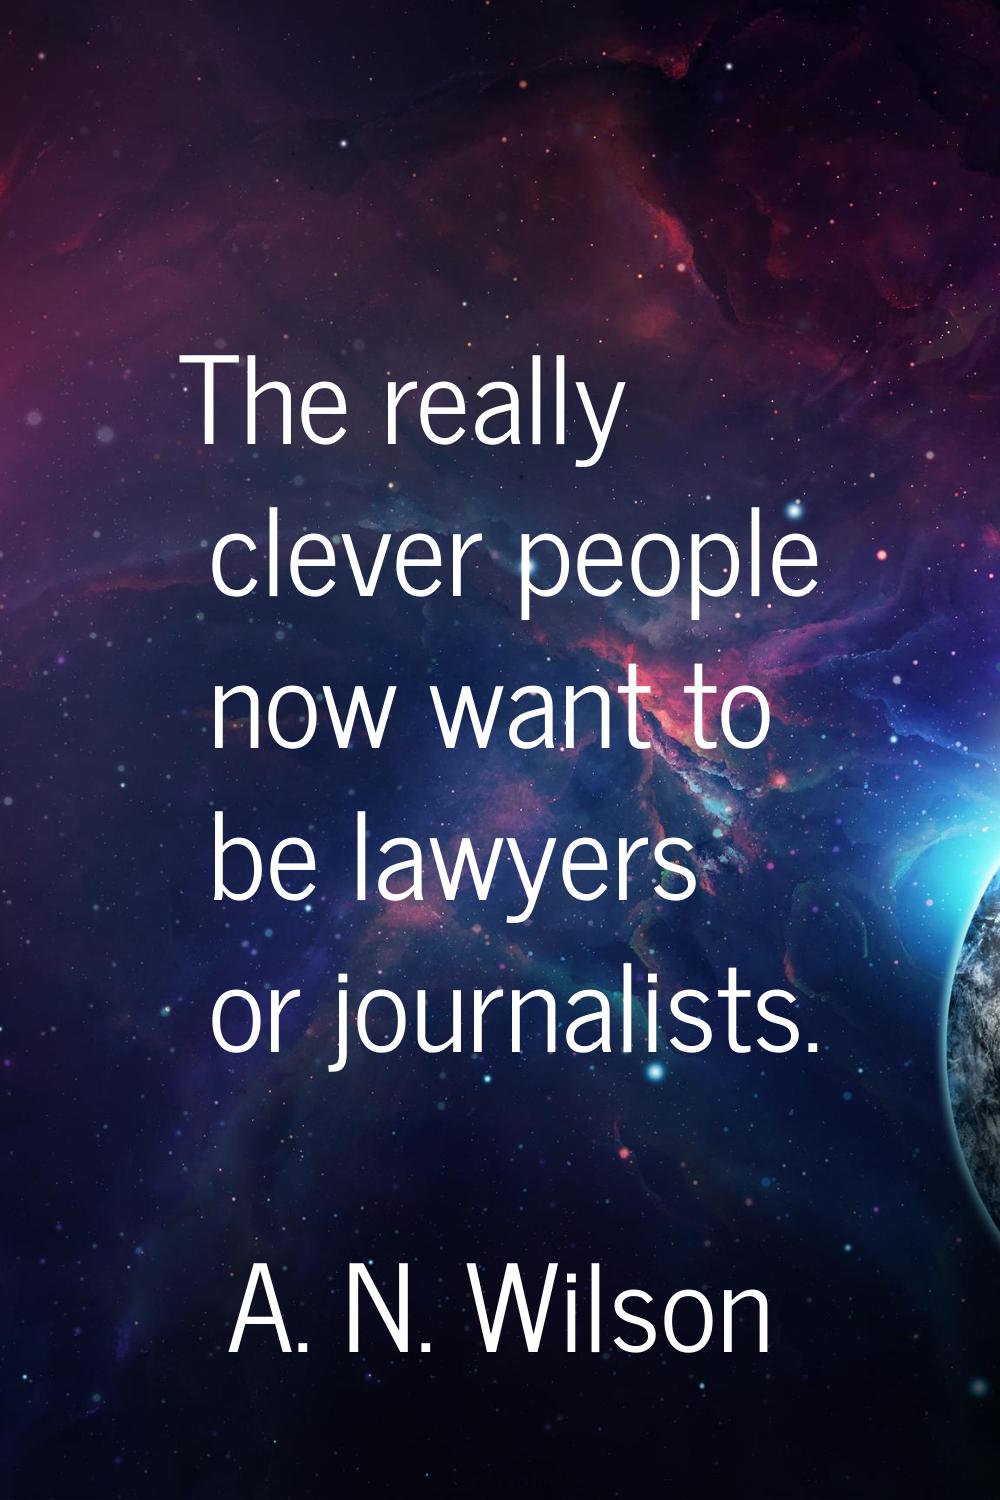 The really clever people now want to be lawyers or journalists.